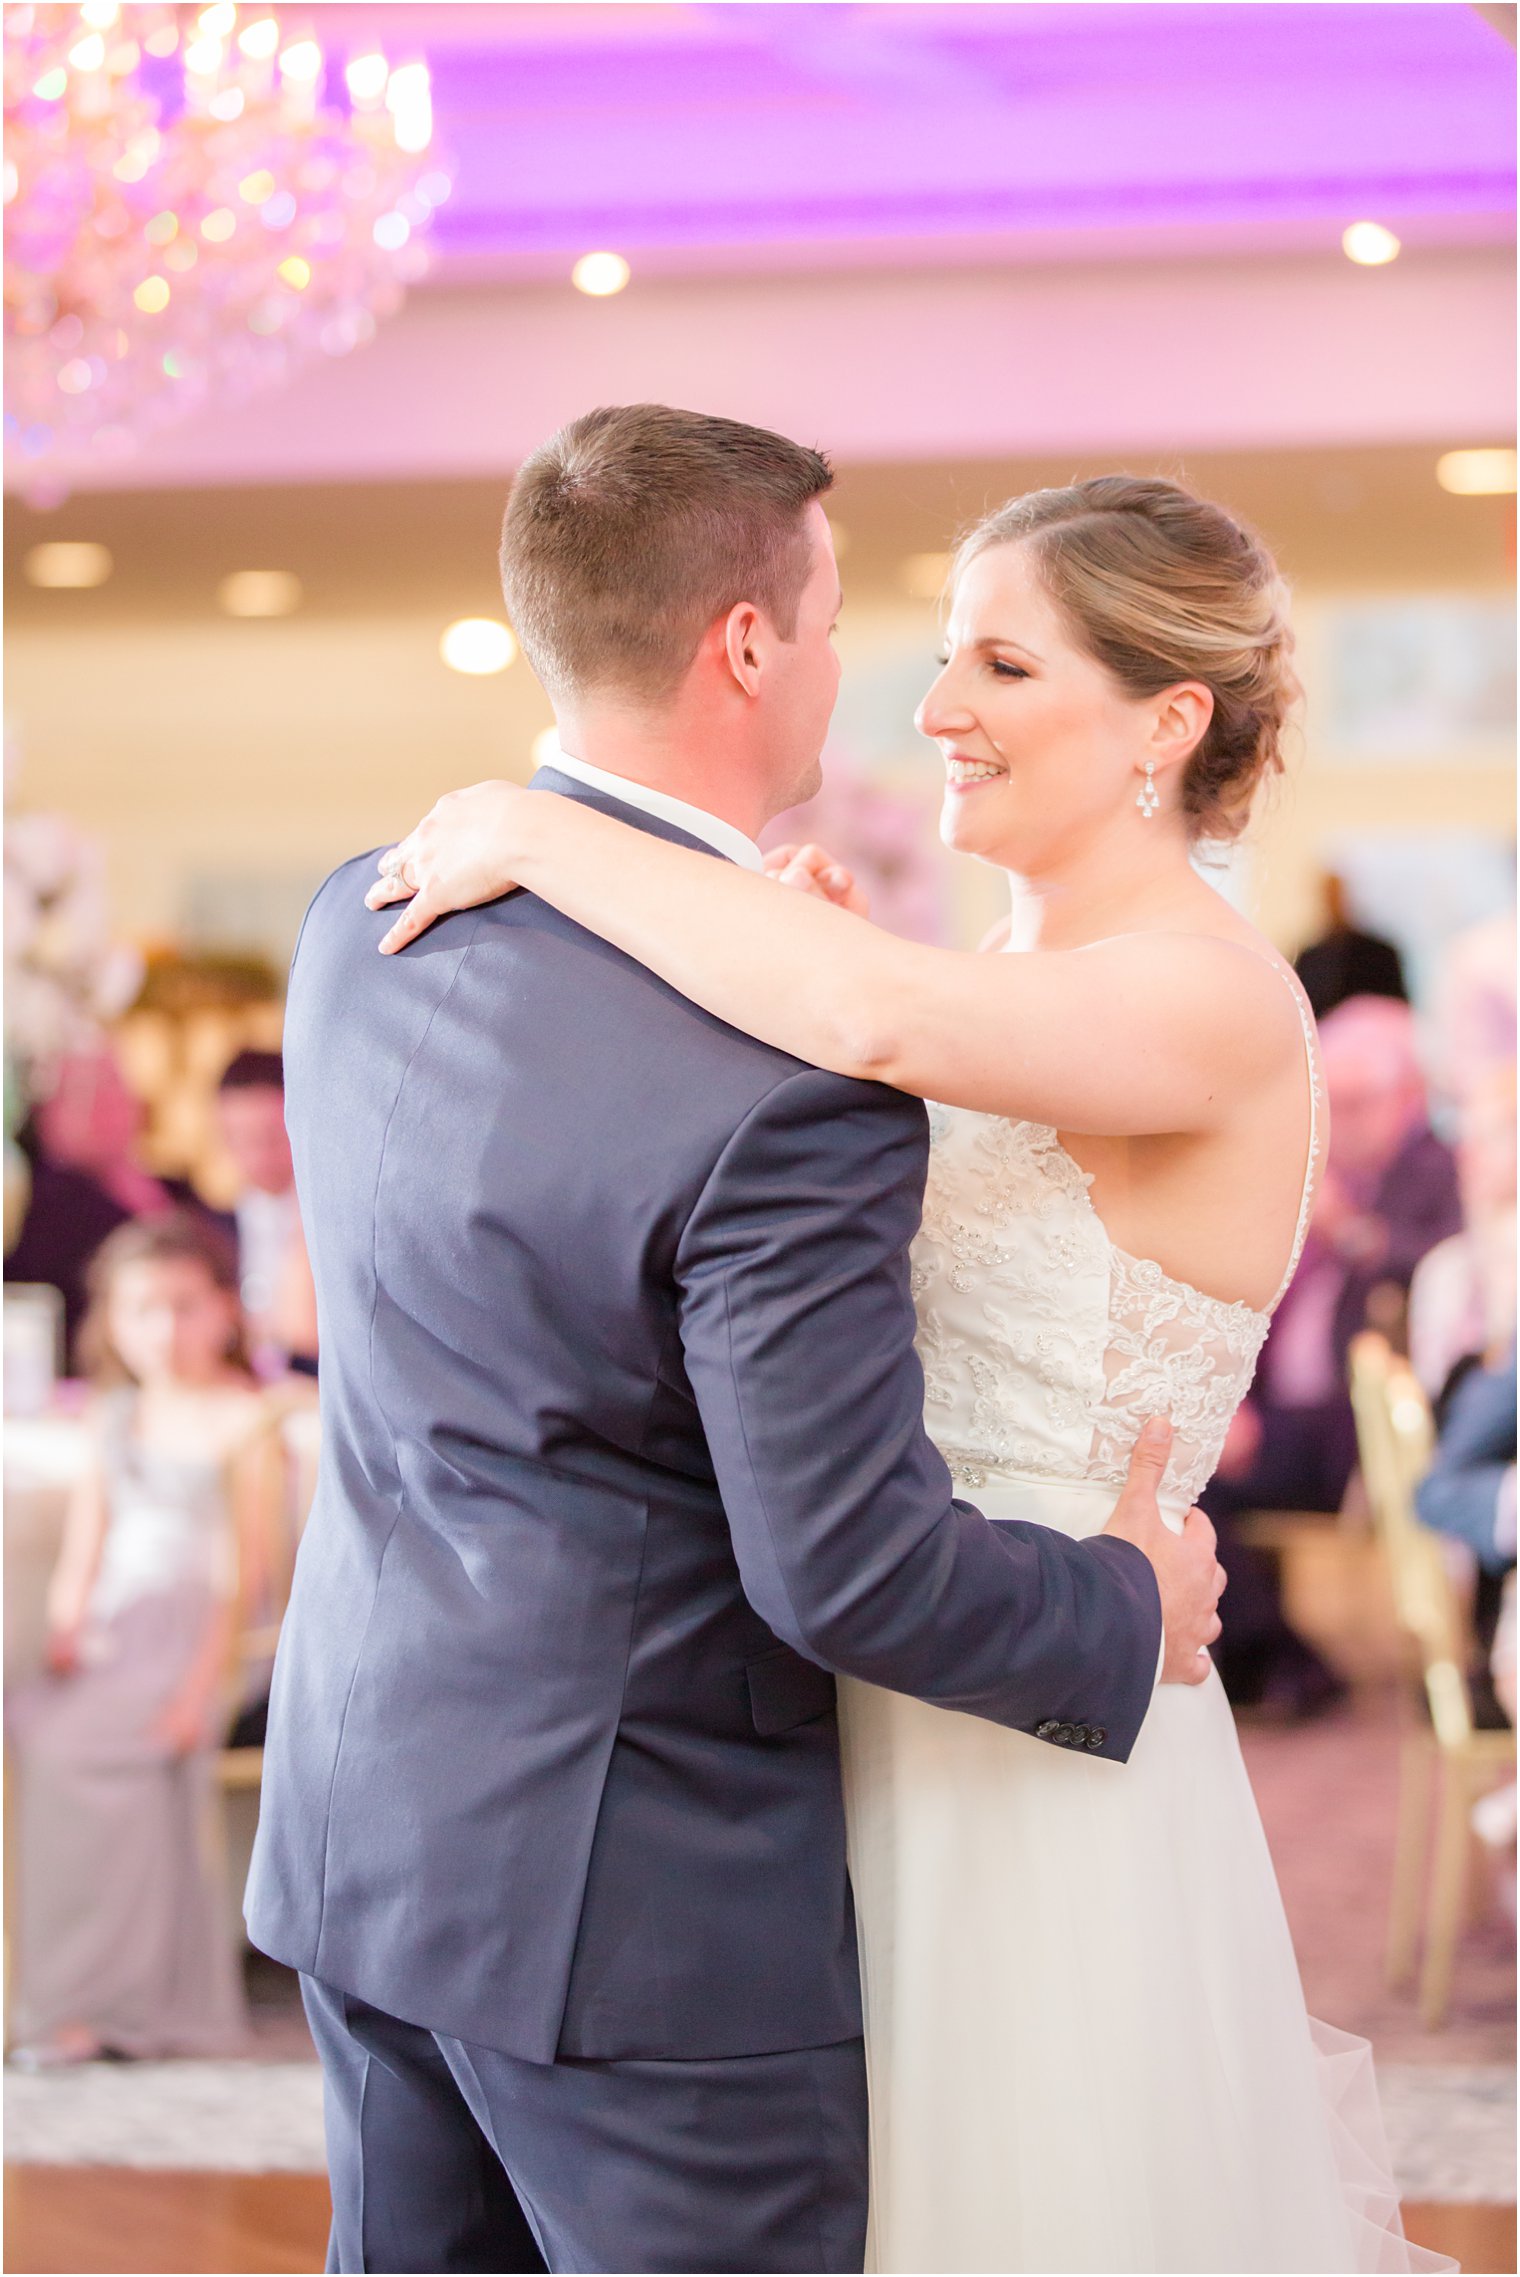 Bride and groom dancing to their first dance song